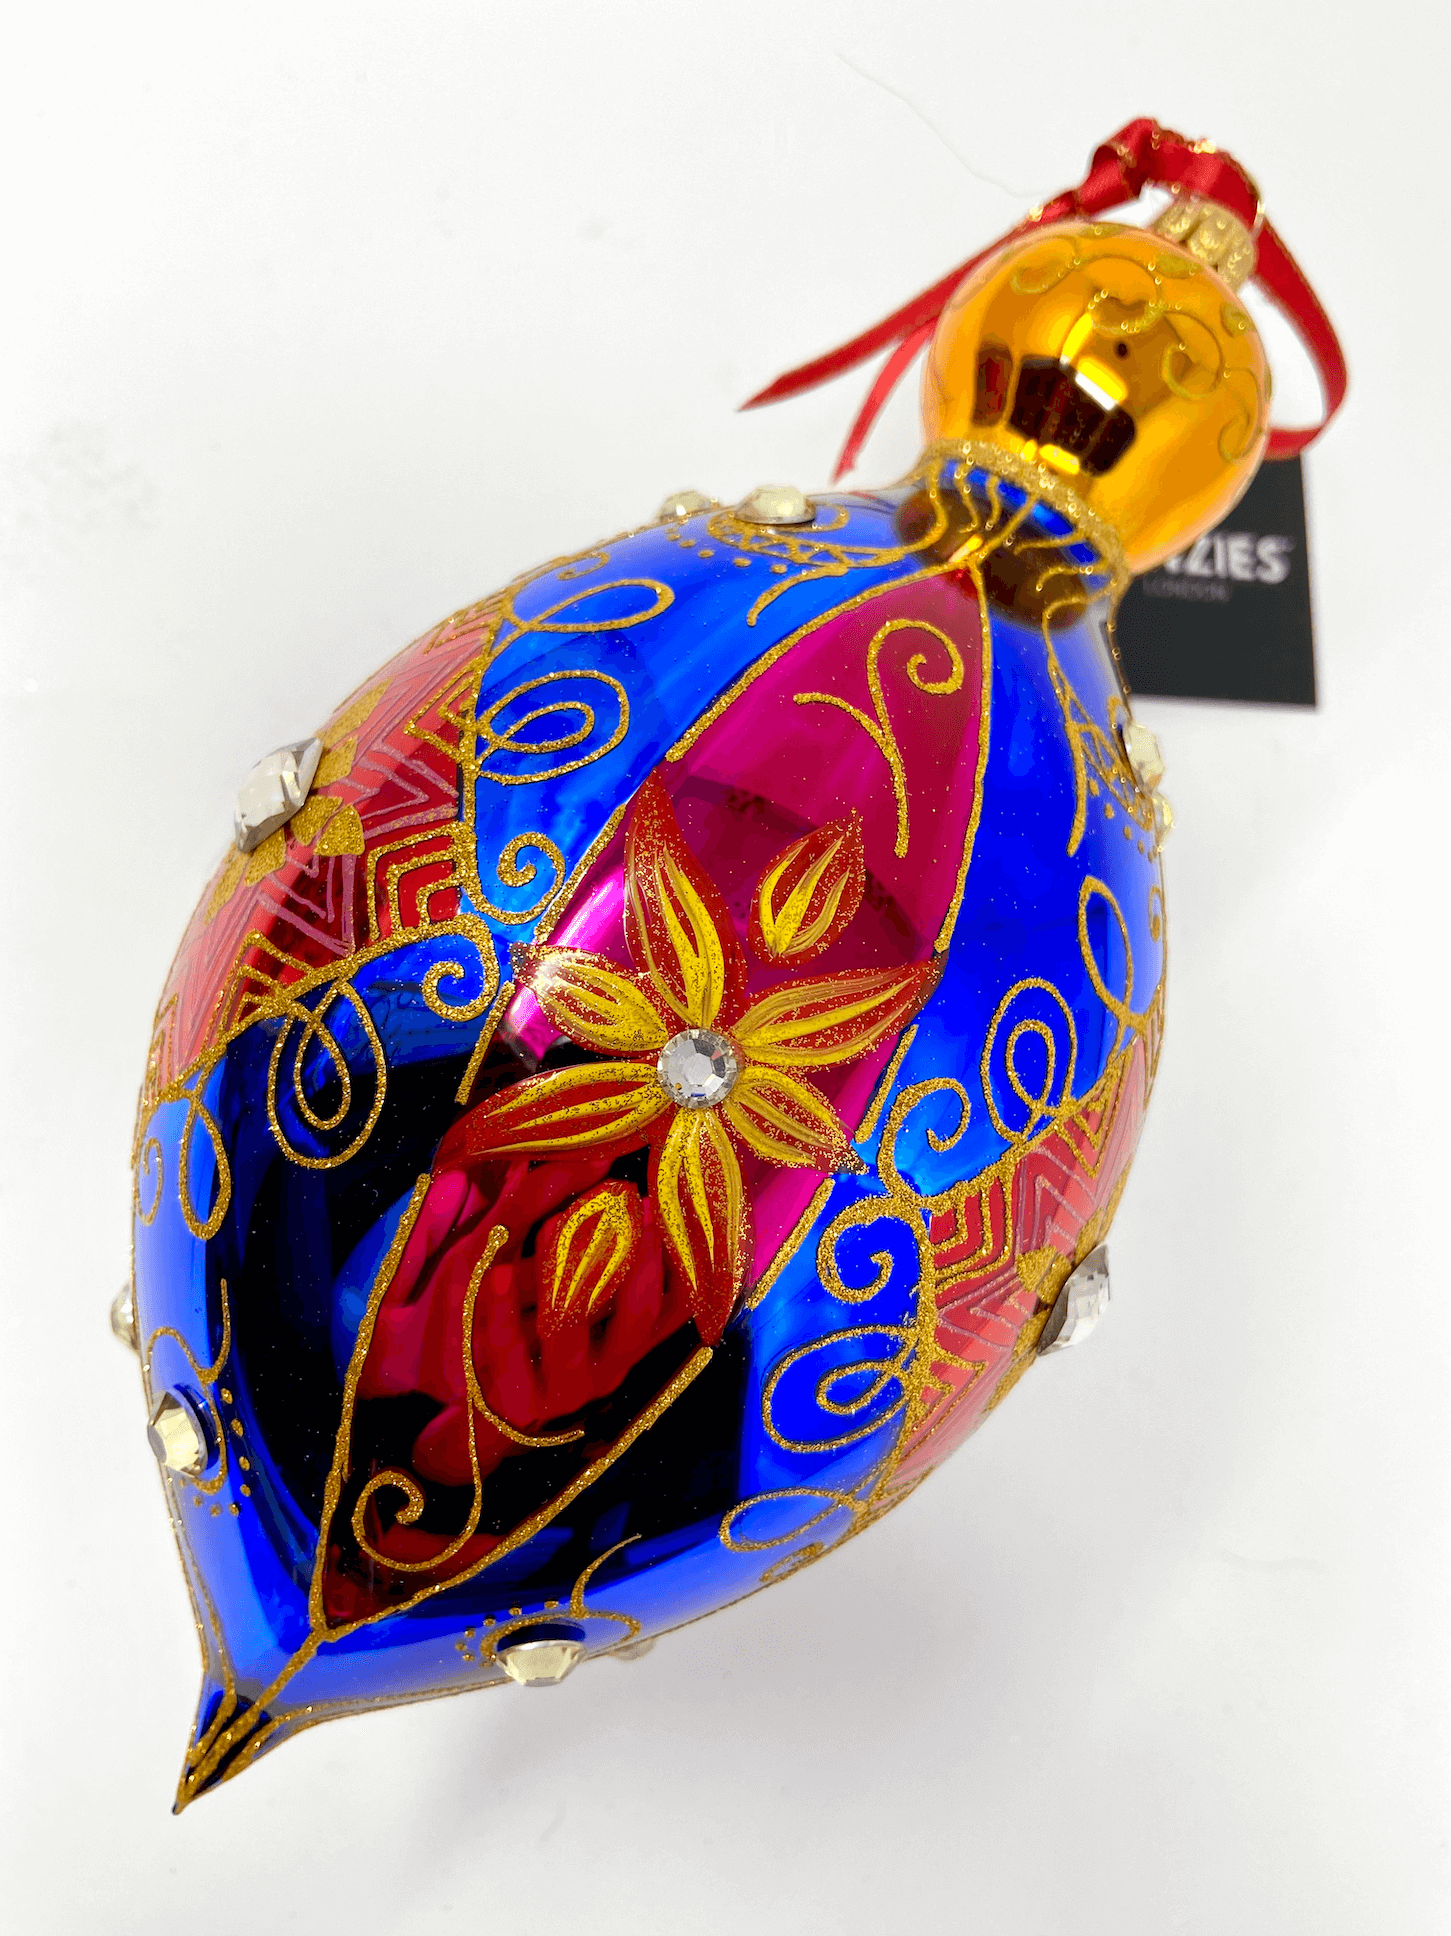 Generously oversized polish glass christmas ornament bauble decorated in blue and red stripes with gold damask detailing.